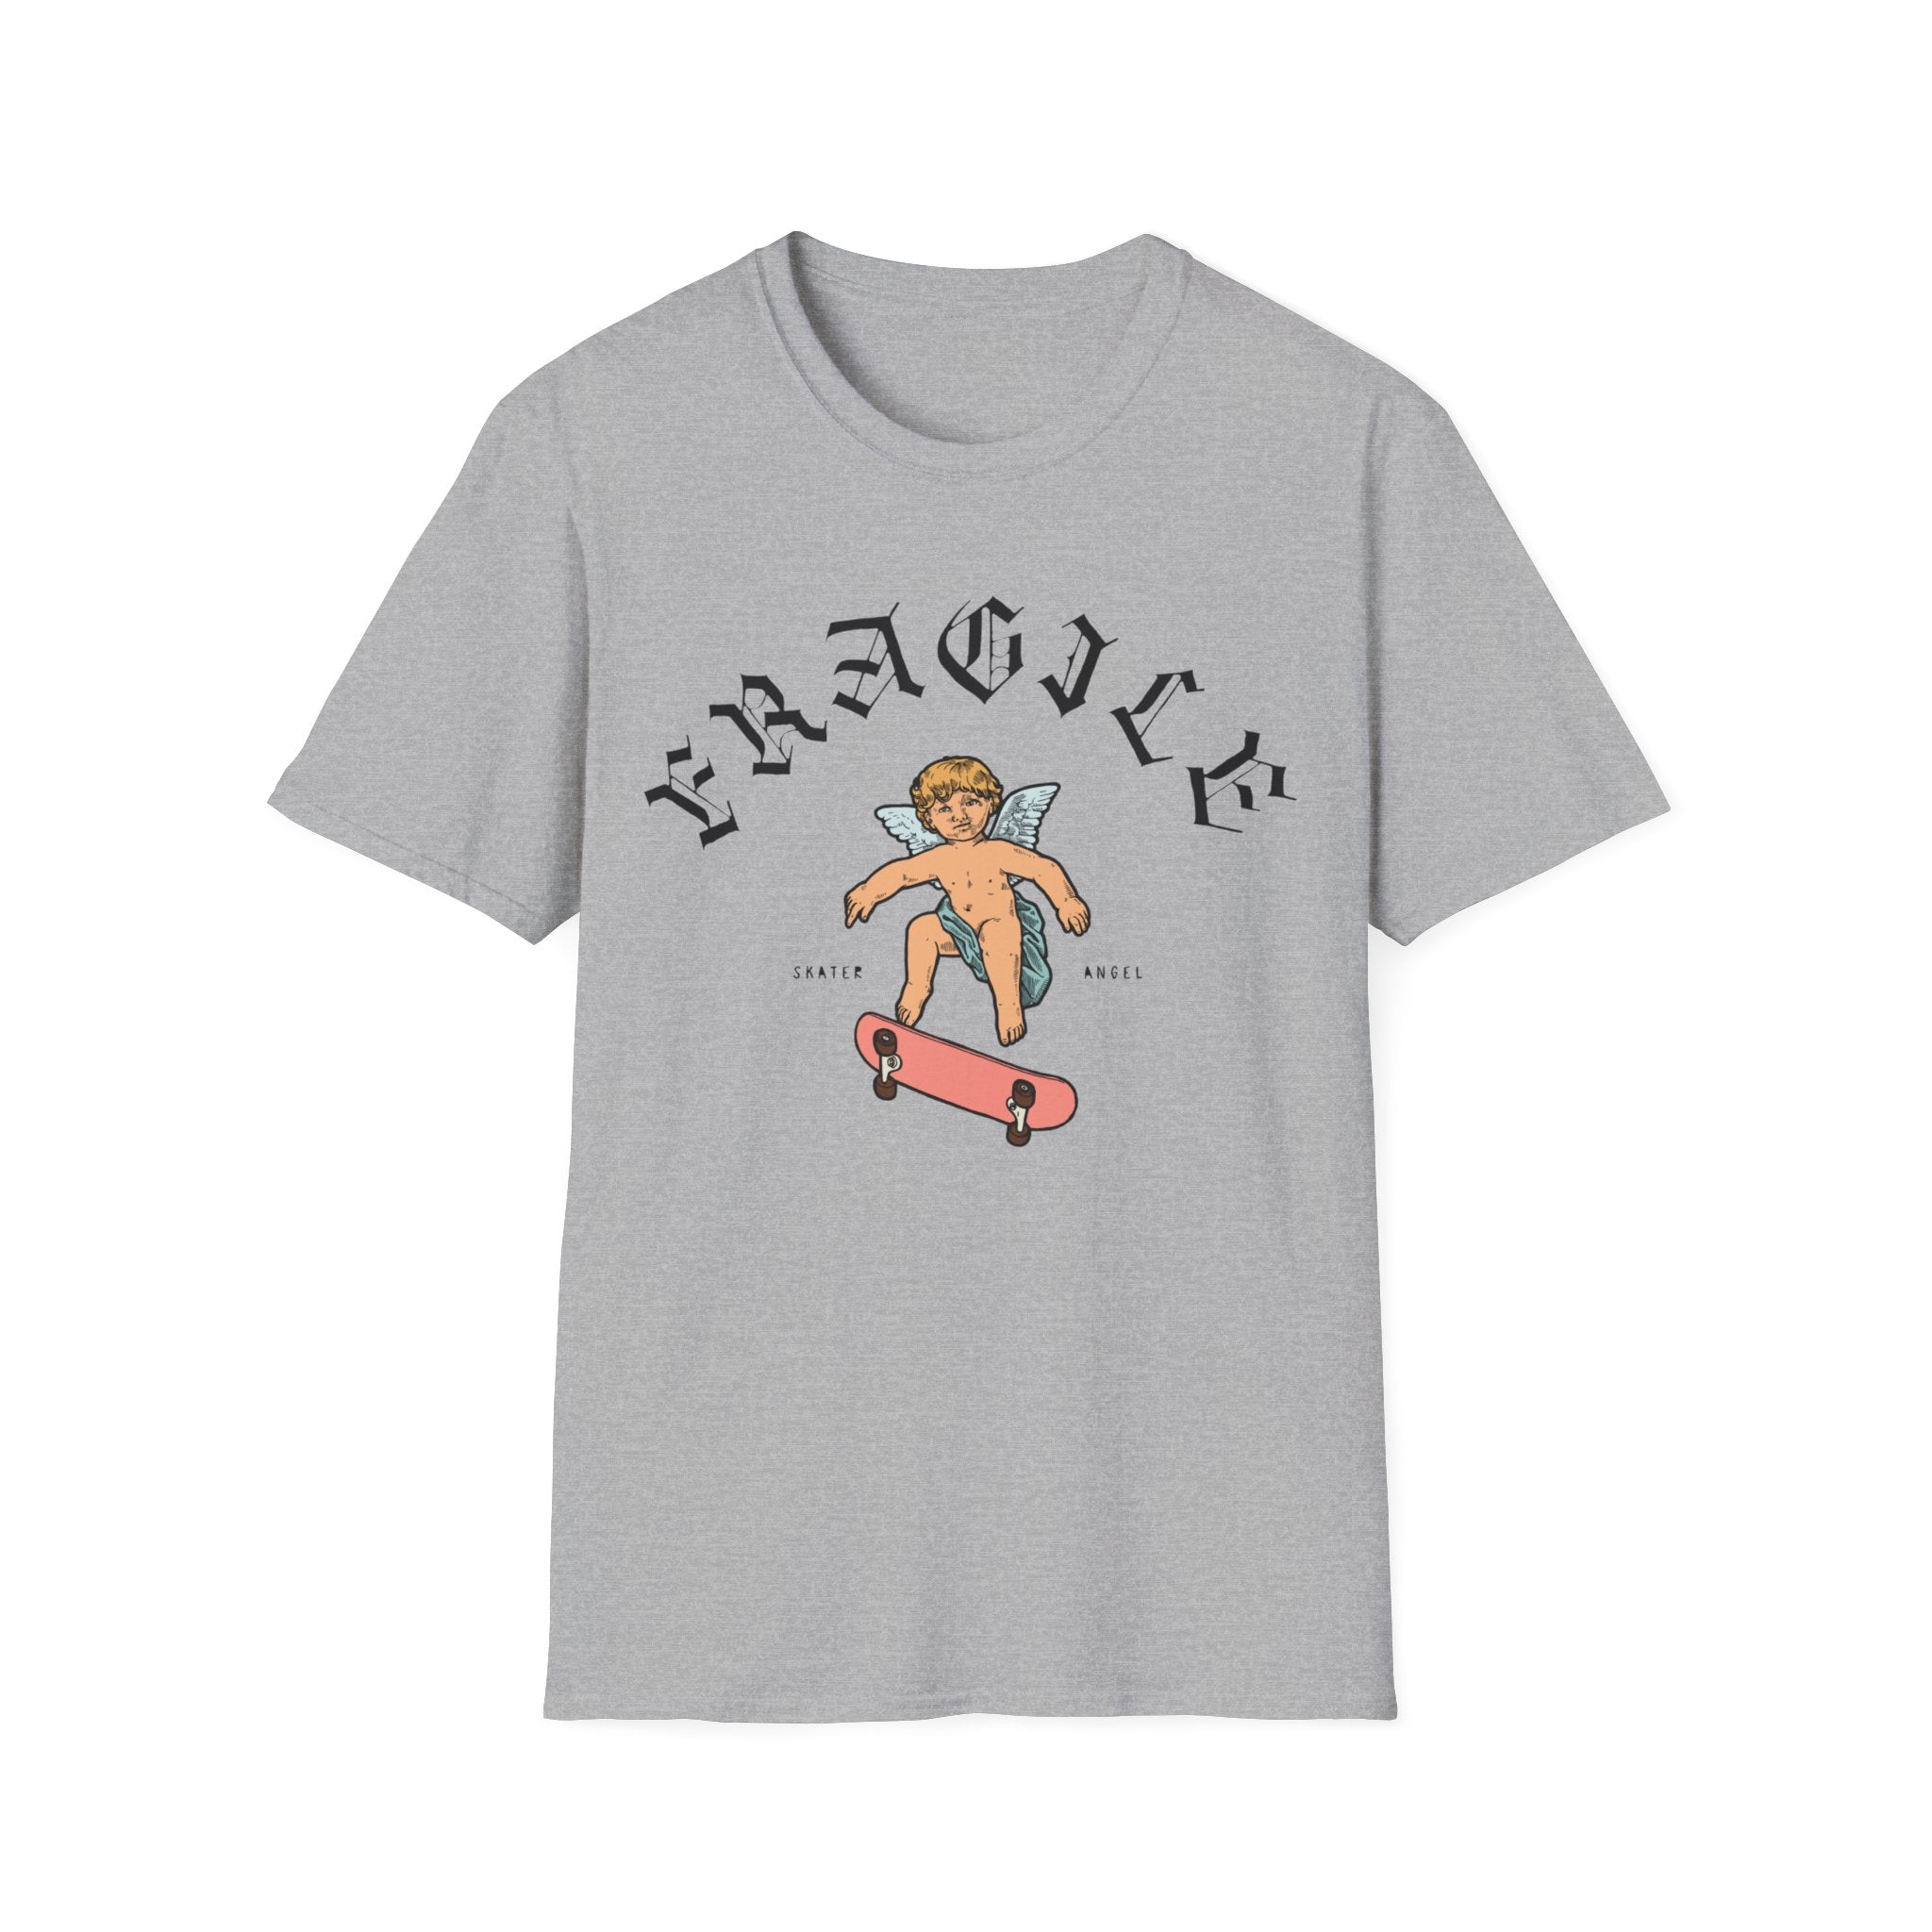 A soft, relaxed fit Skater Angel gray skating t-shirt featuring an image of a girl riding a skateboard.